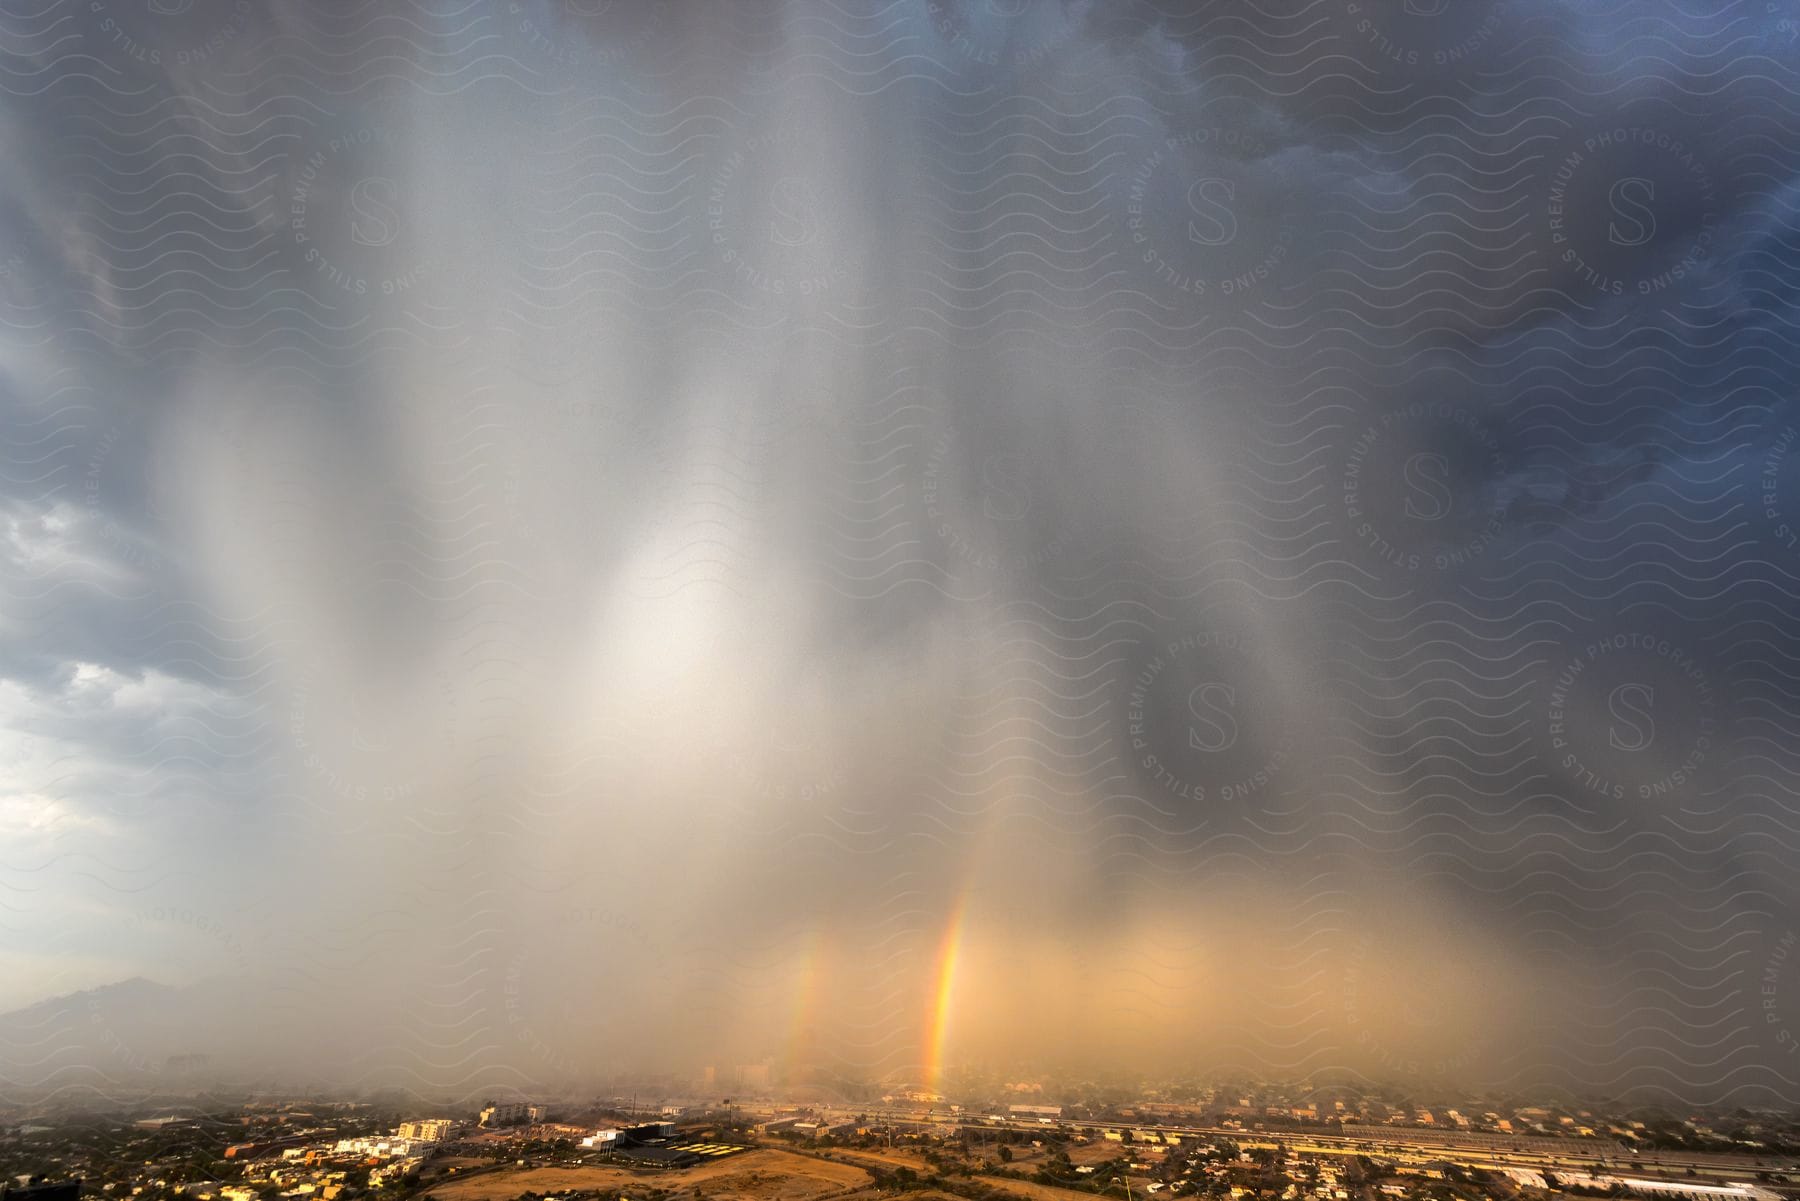 An aerial view of a rainbow emerging from a rain cloud over a city